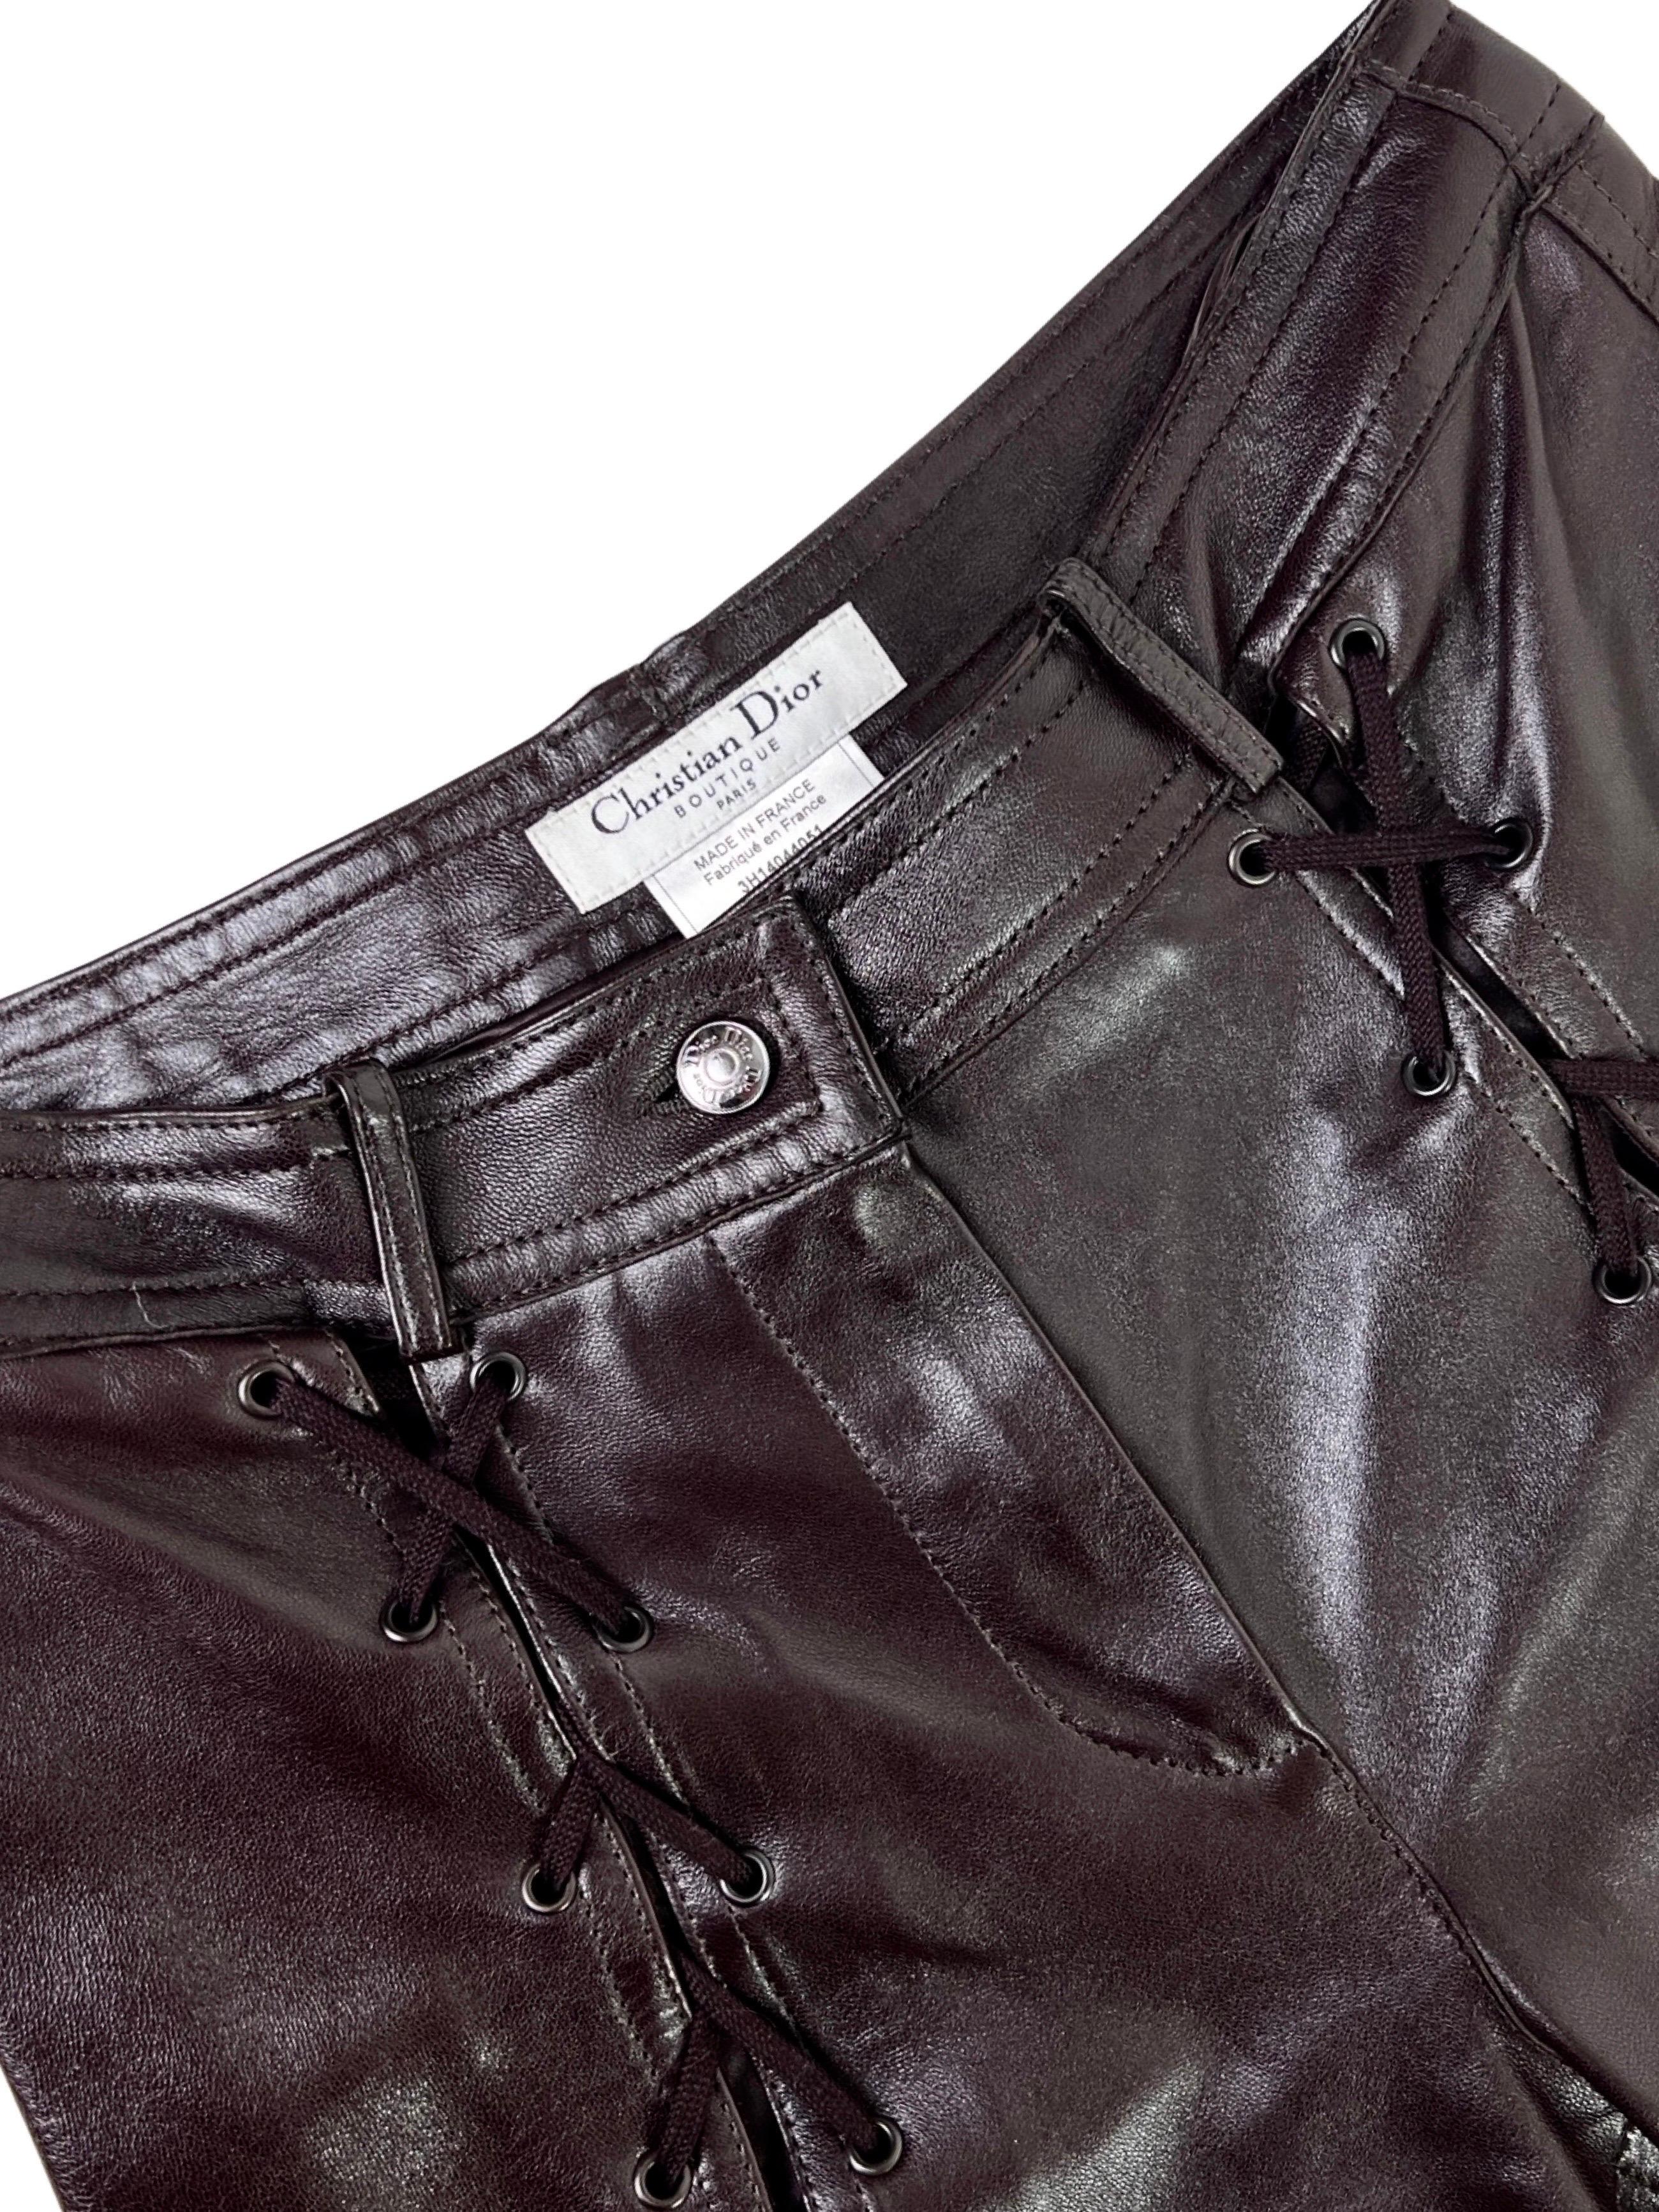 Dior by John Galliano Fall 2003 Leather Lace-Up Pants in Dark Chocolate For Sale 8